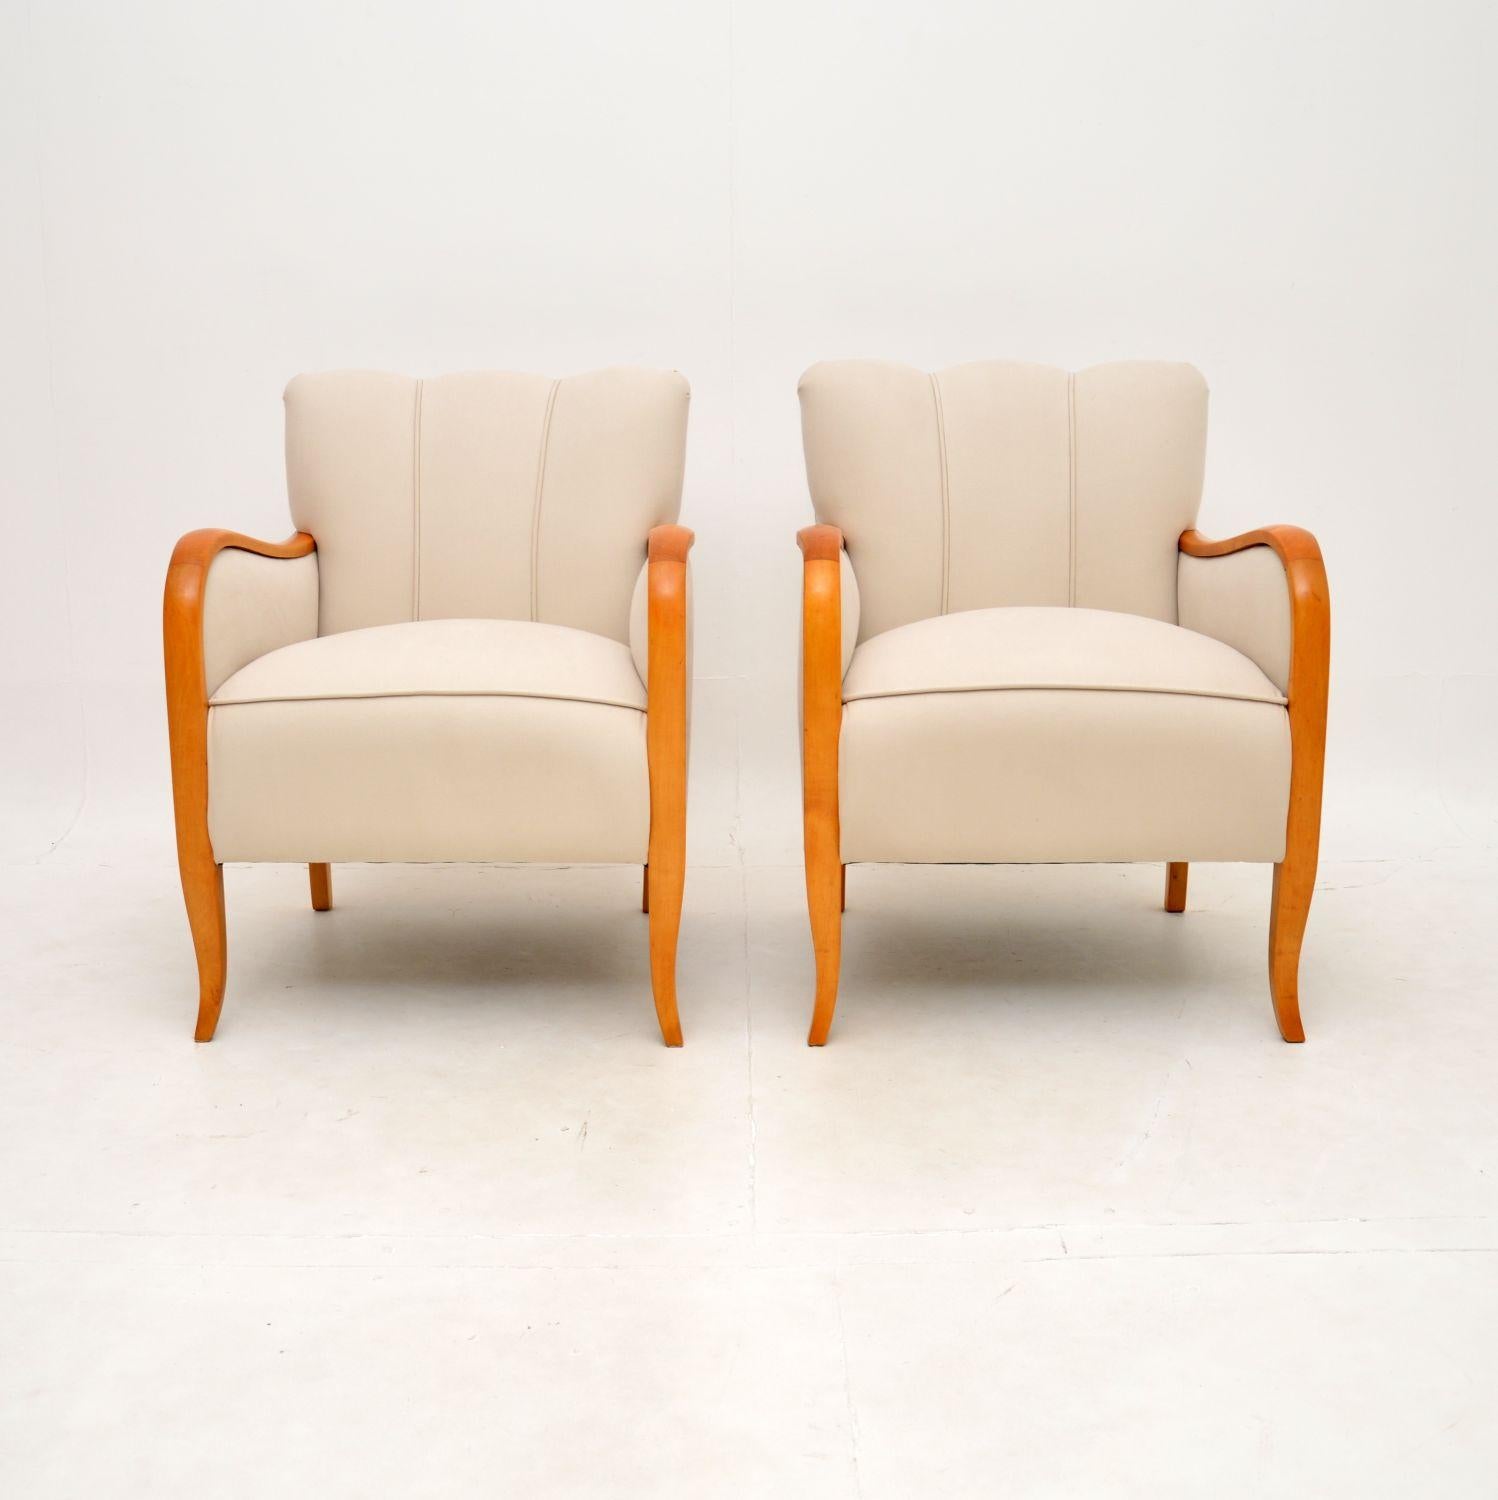 A very stylish and extremely well made pair of Art Deco armchairs in satin birch. They were recently imported from Sweden, they date from around the 1920’s.

They have lovely proportions and are very comfortable. The quality is amazing, with